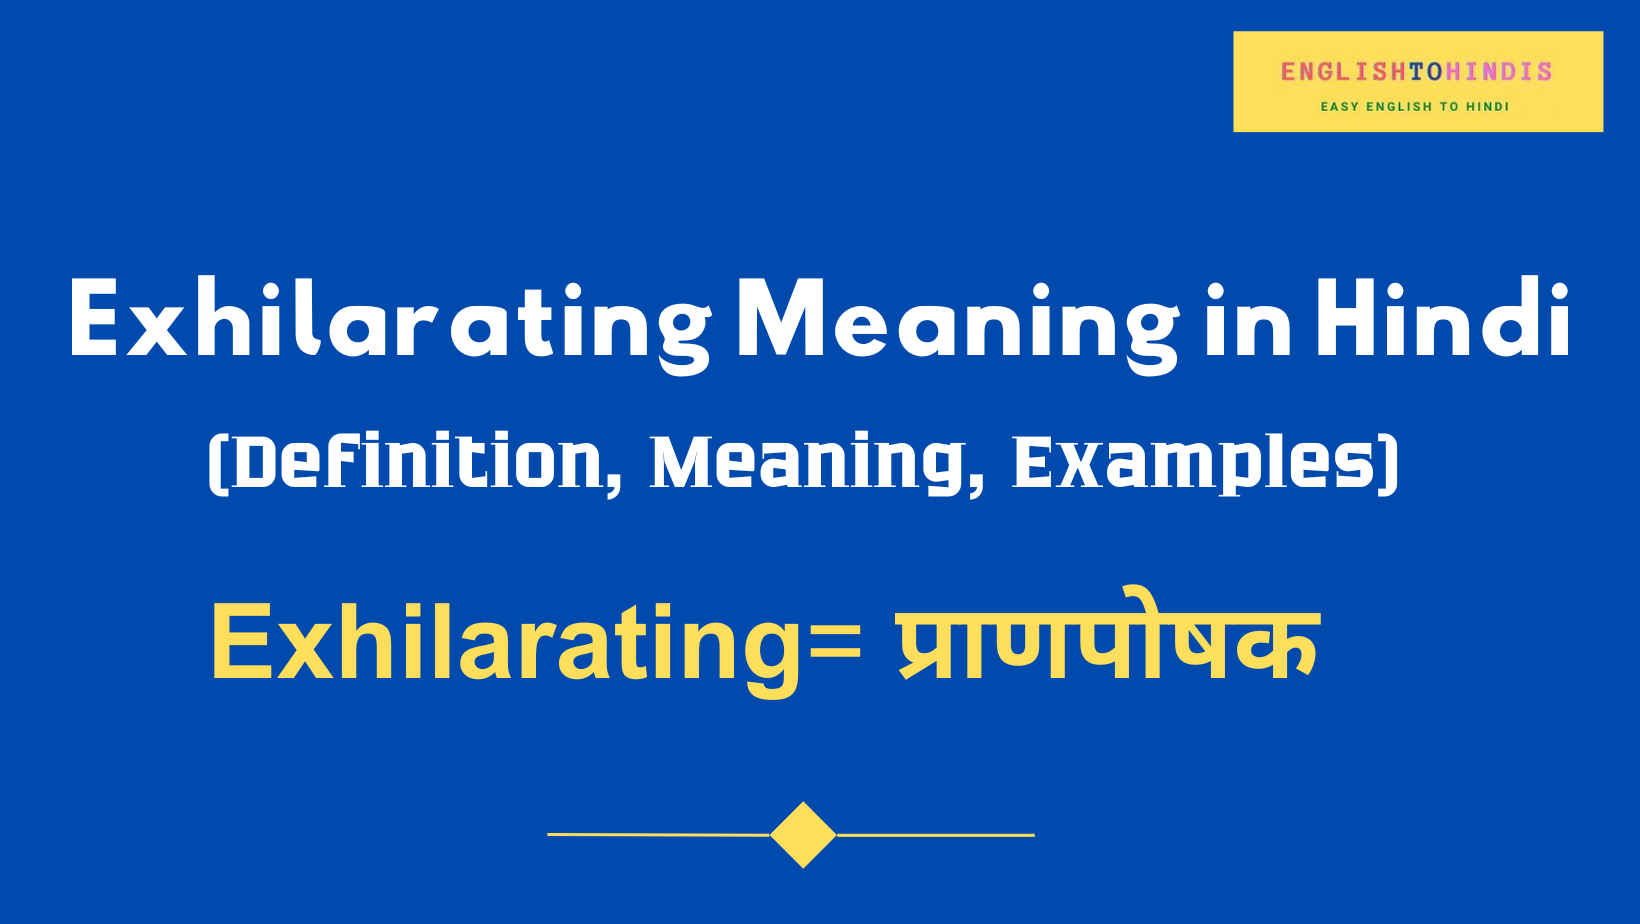 Exhilarating meaning in Hindi